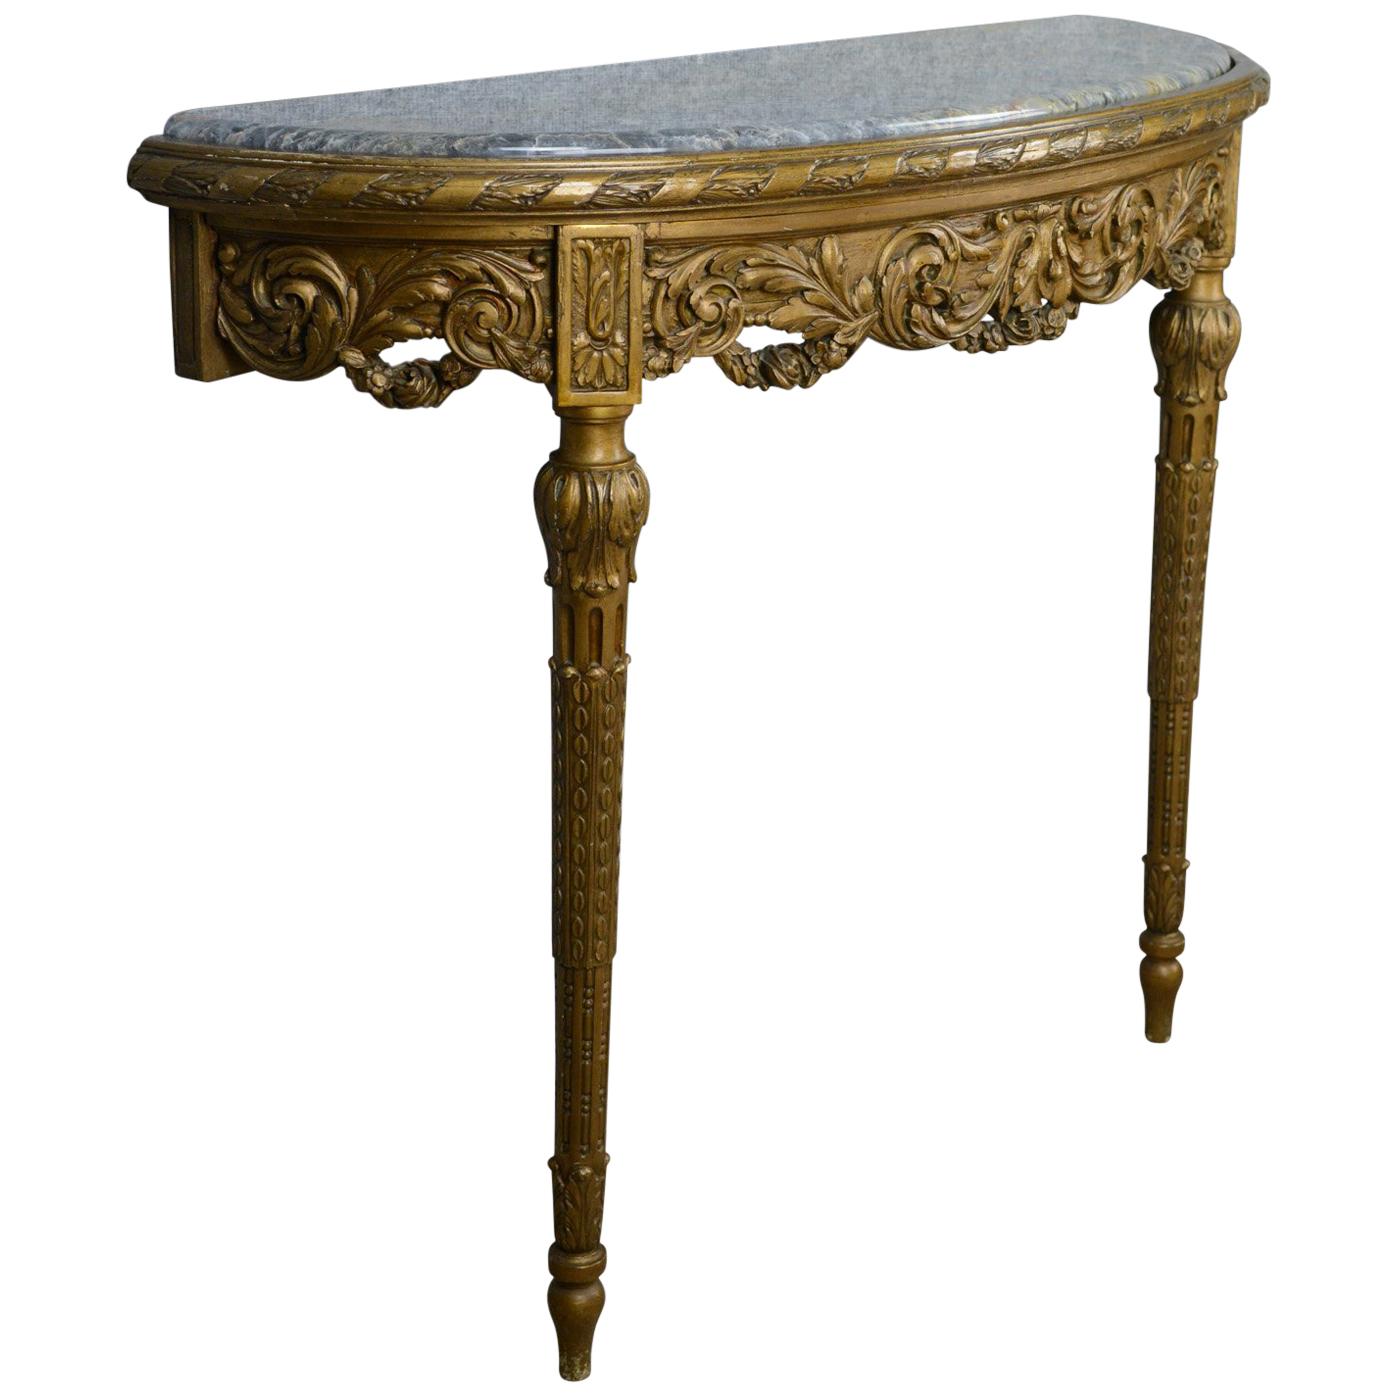 French Antique Console Table, Giltwood, Marble, Classical Revival, Pier